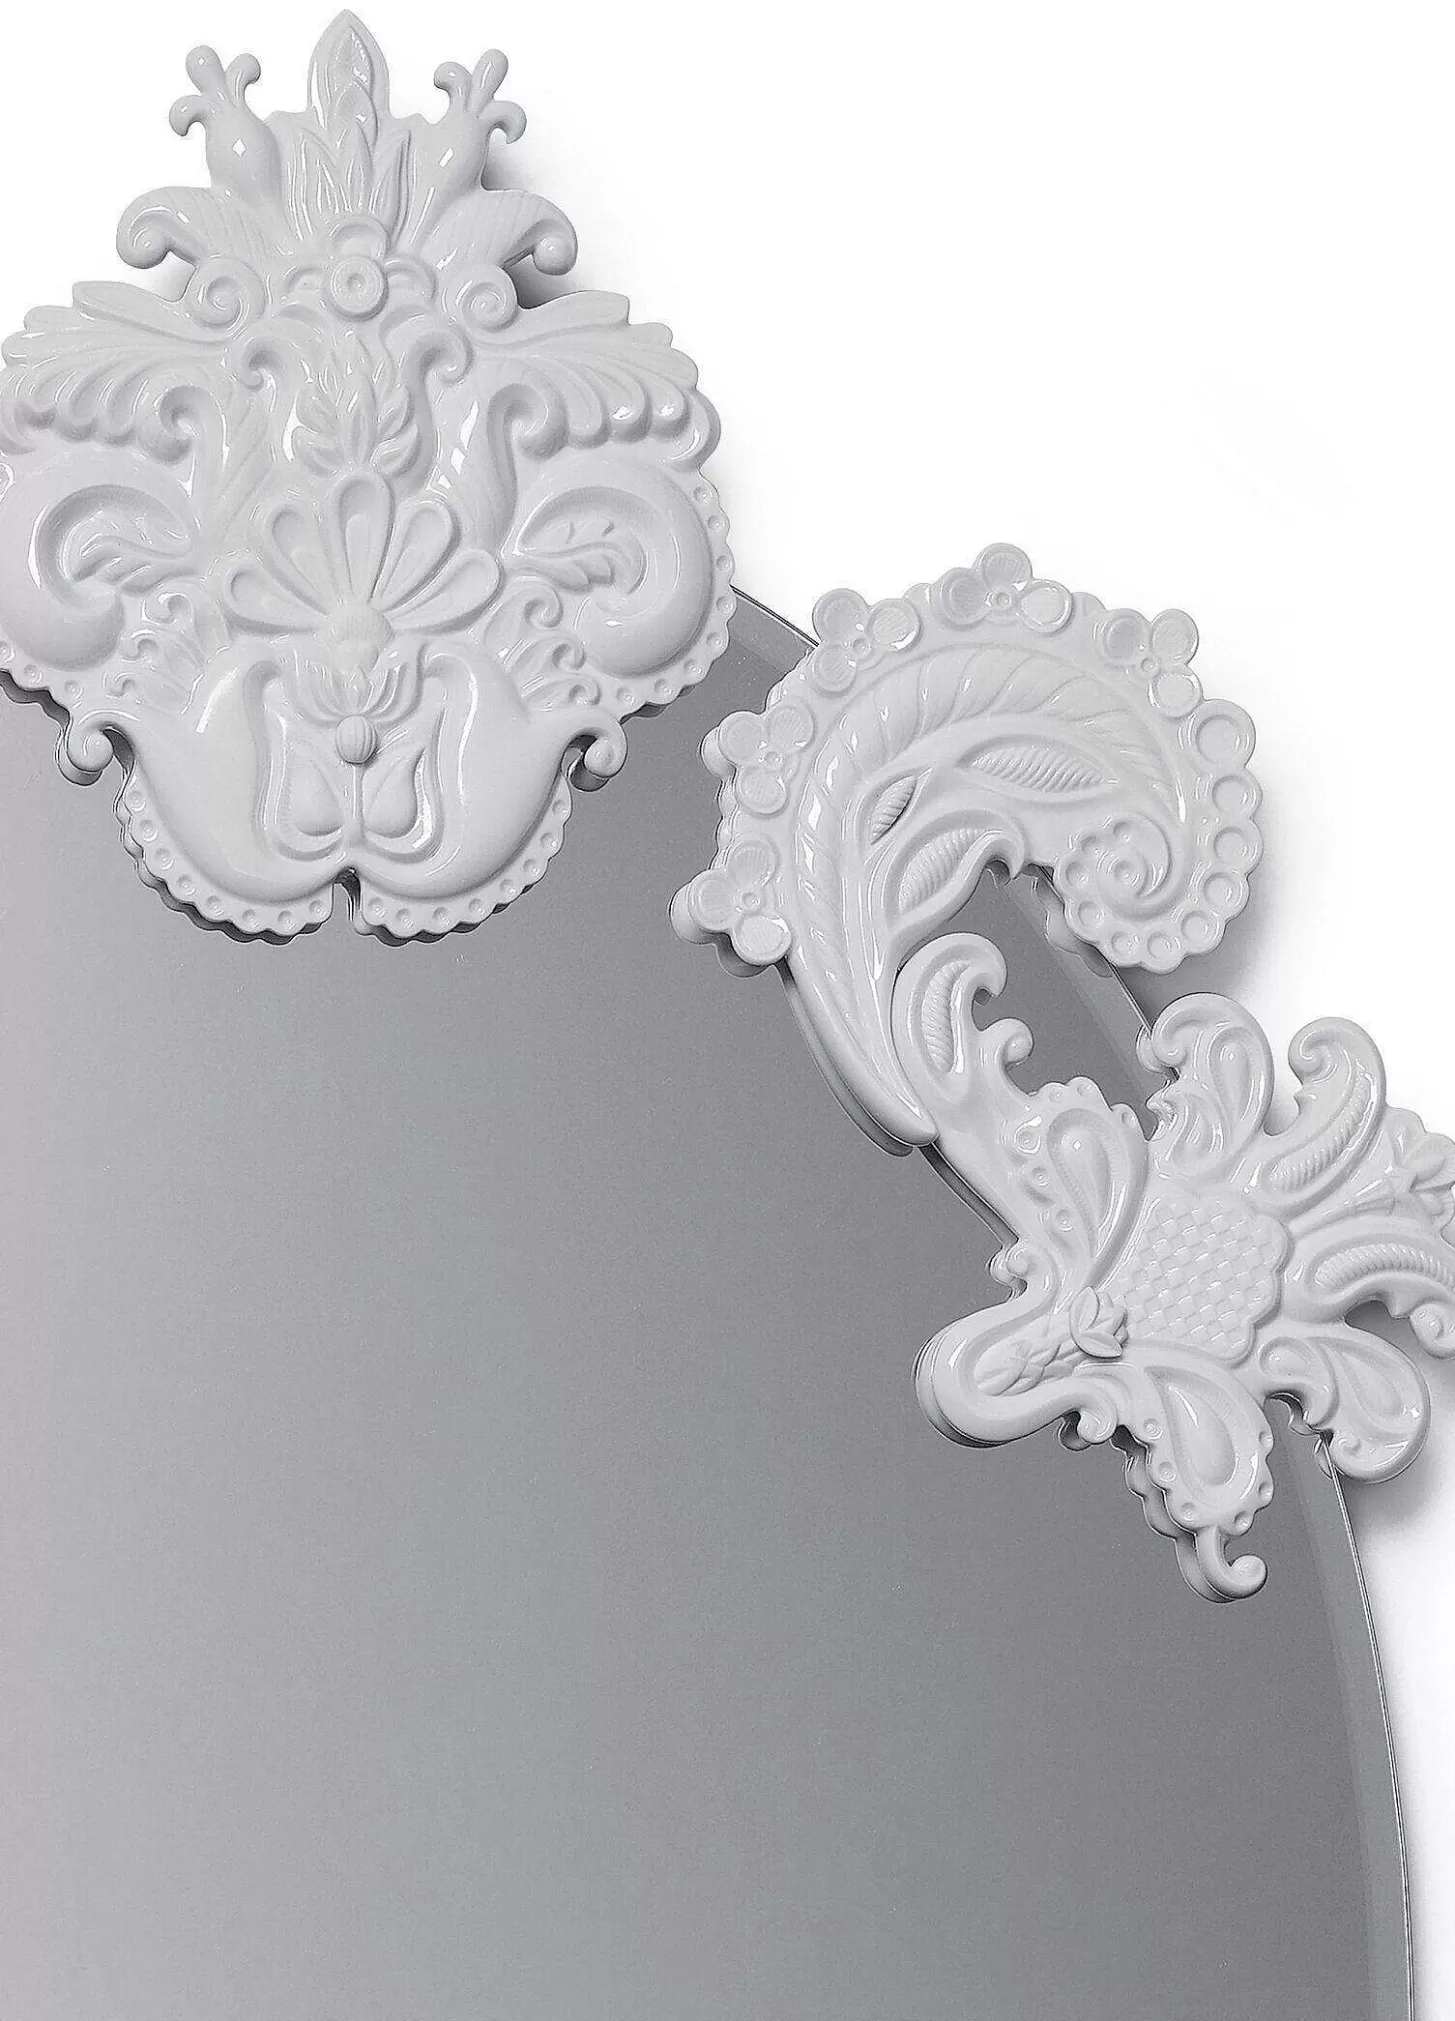 Lladró Oval Mirror Without Frame Wall Mirror. Limited Edition^ Mirrors